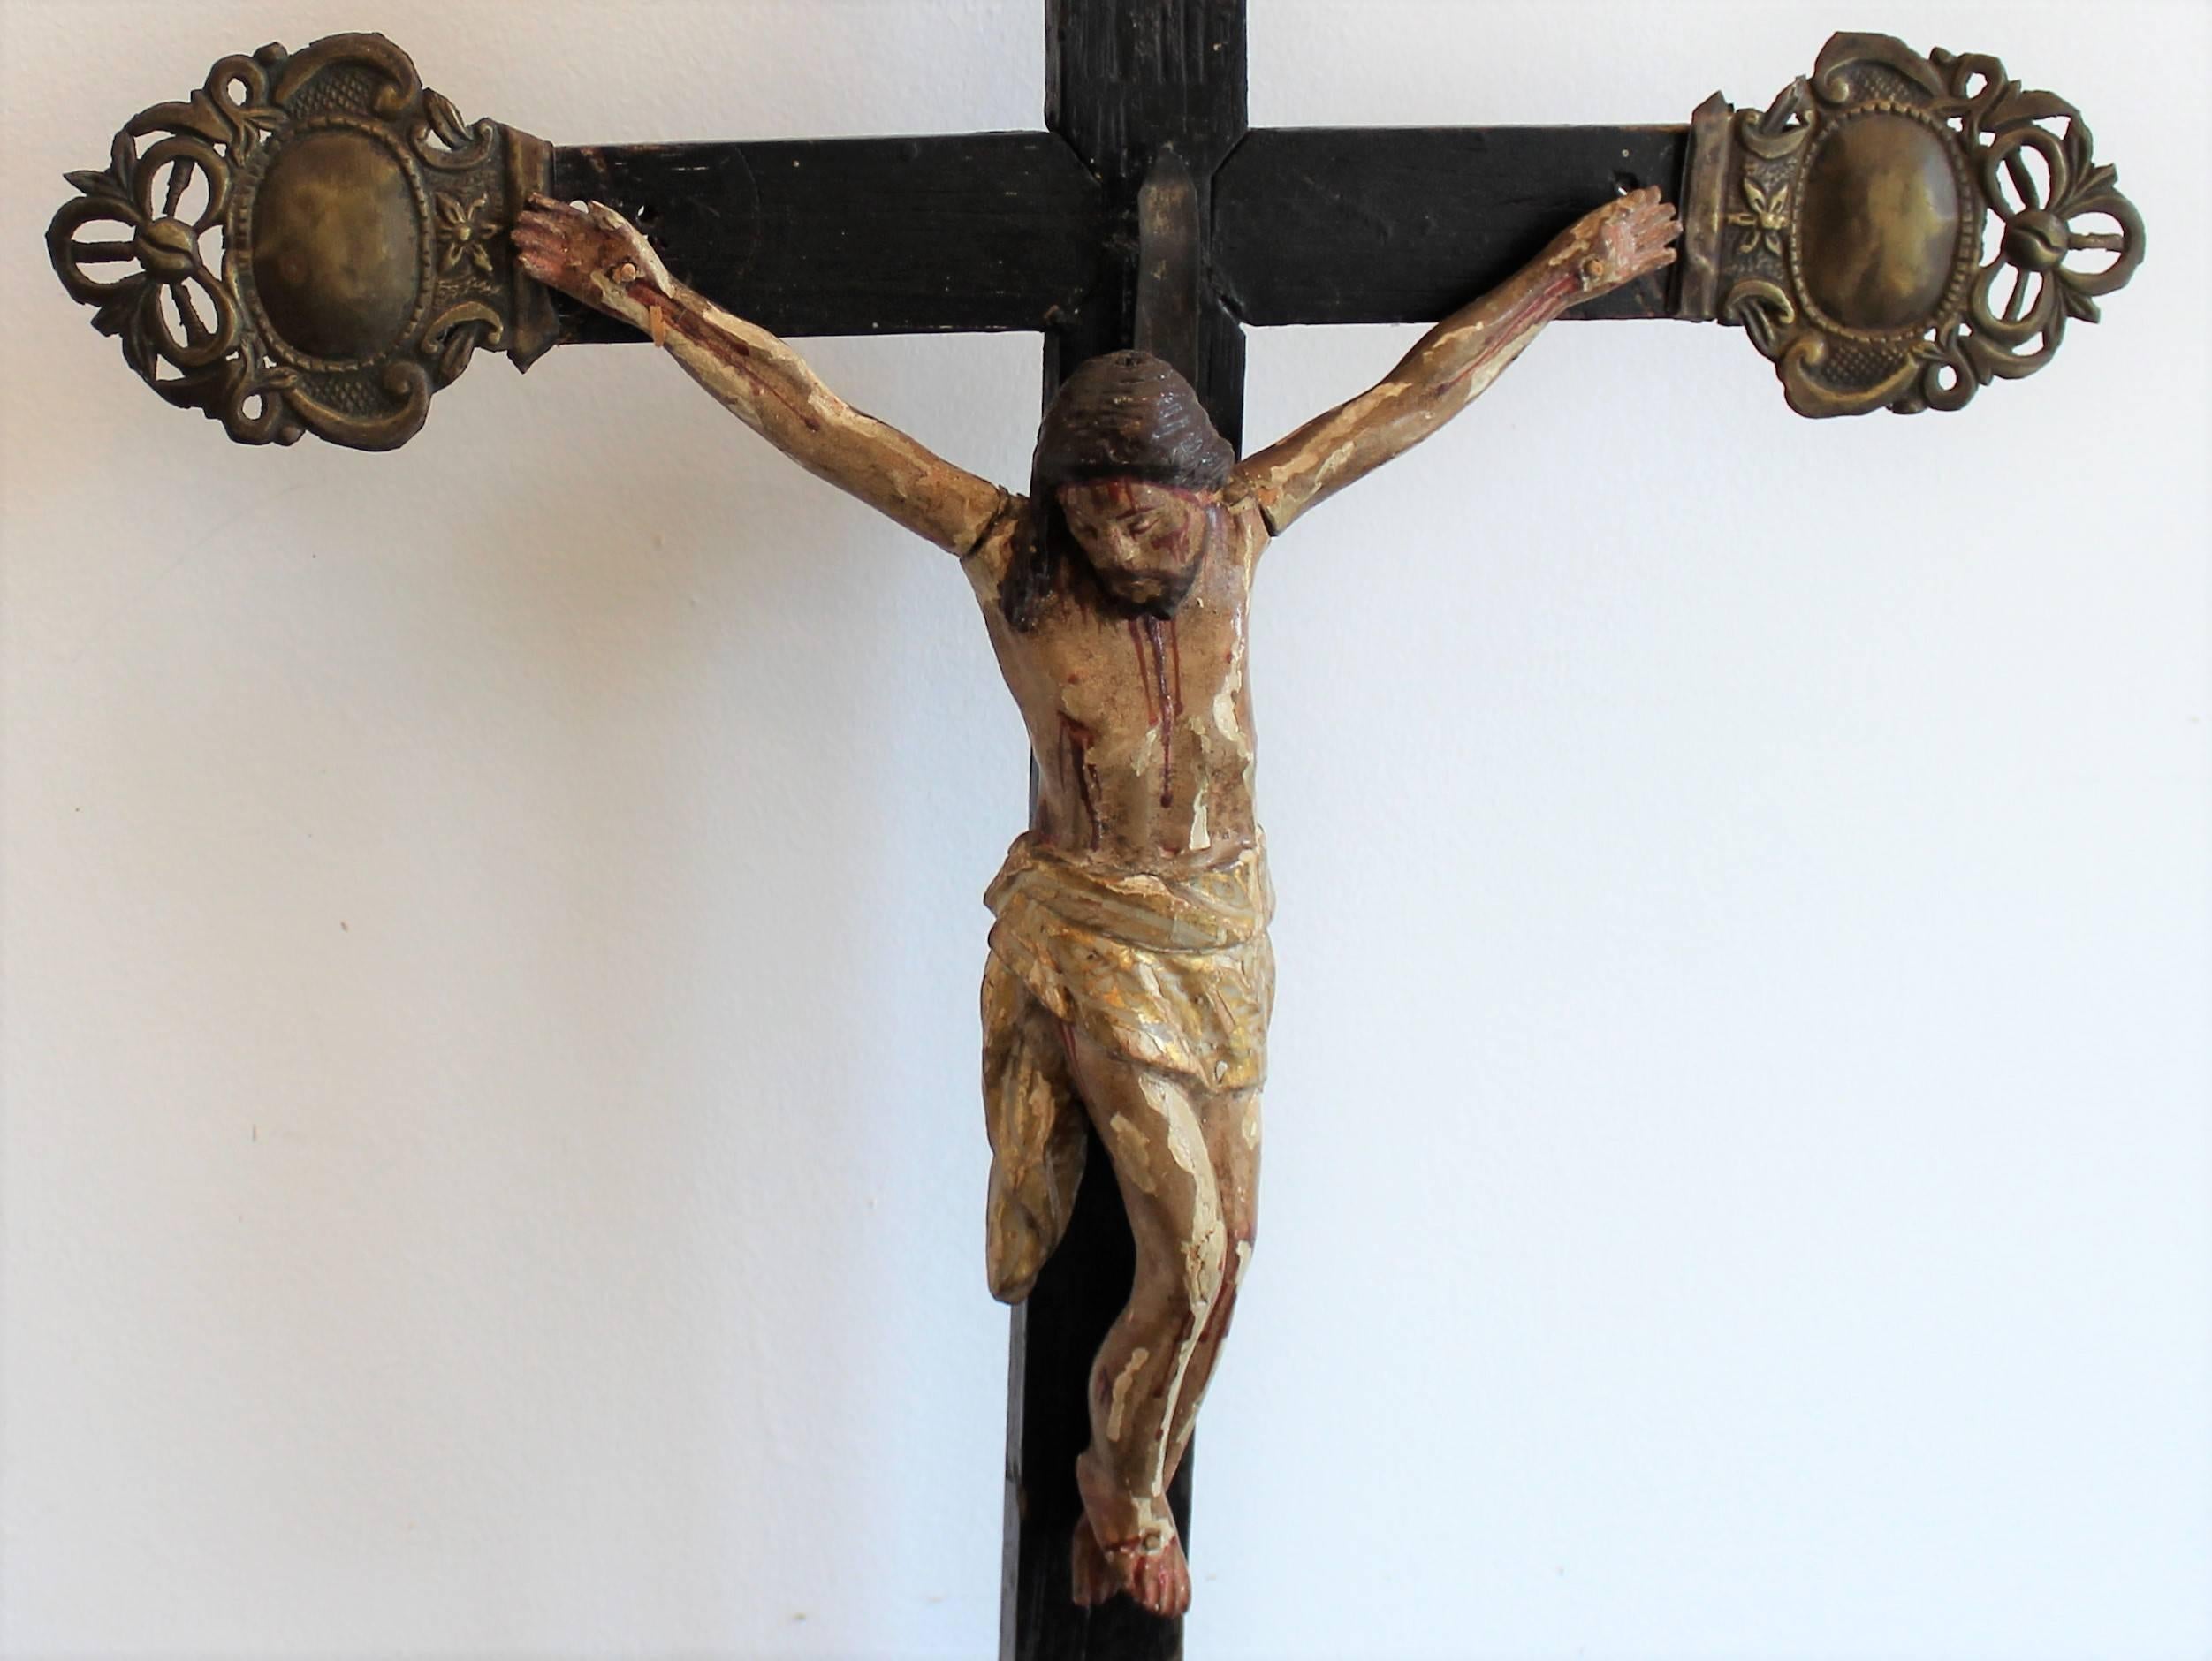 Early 19th century hand-carved and polychromed wood crucifix from Quebec.